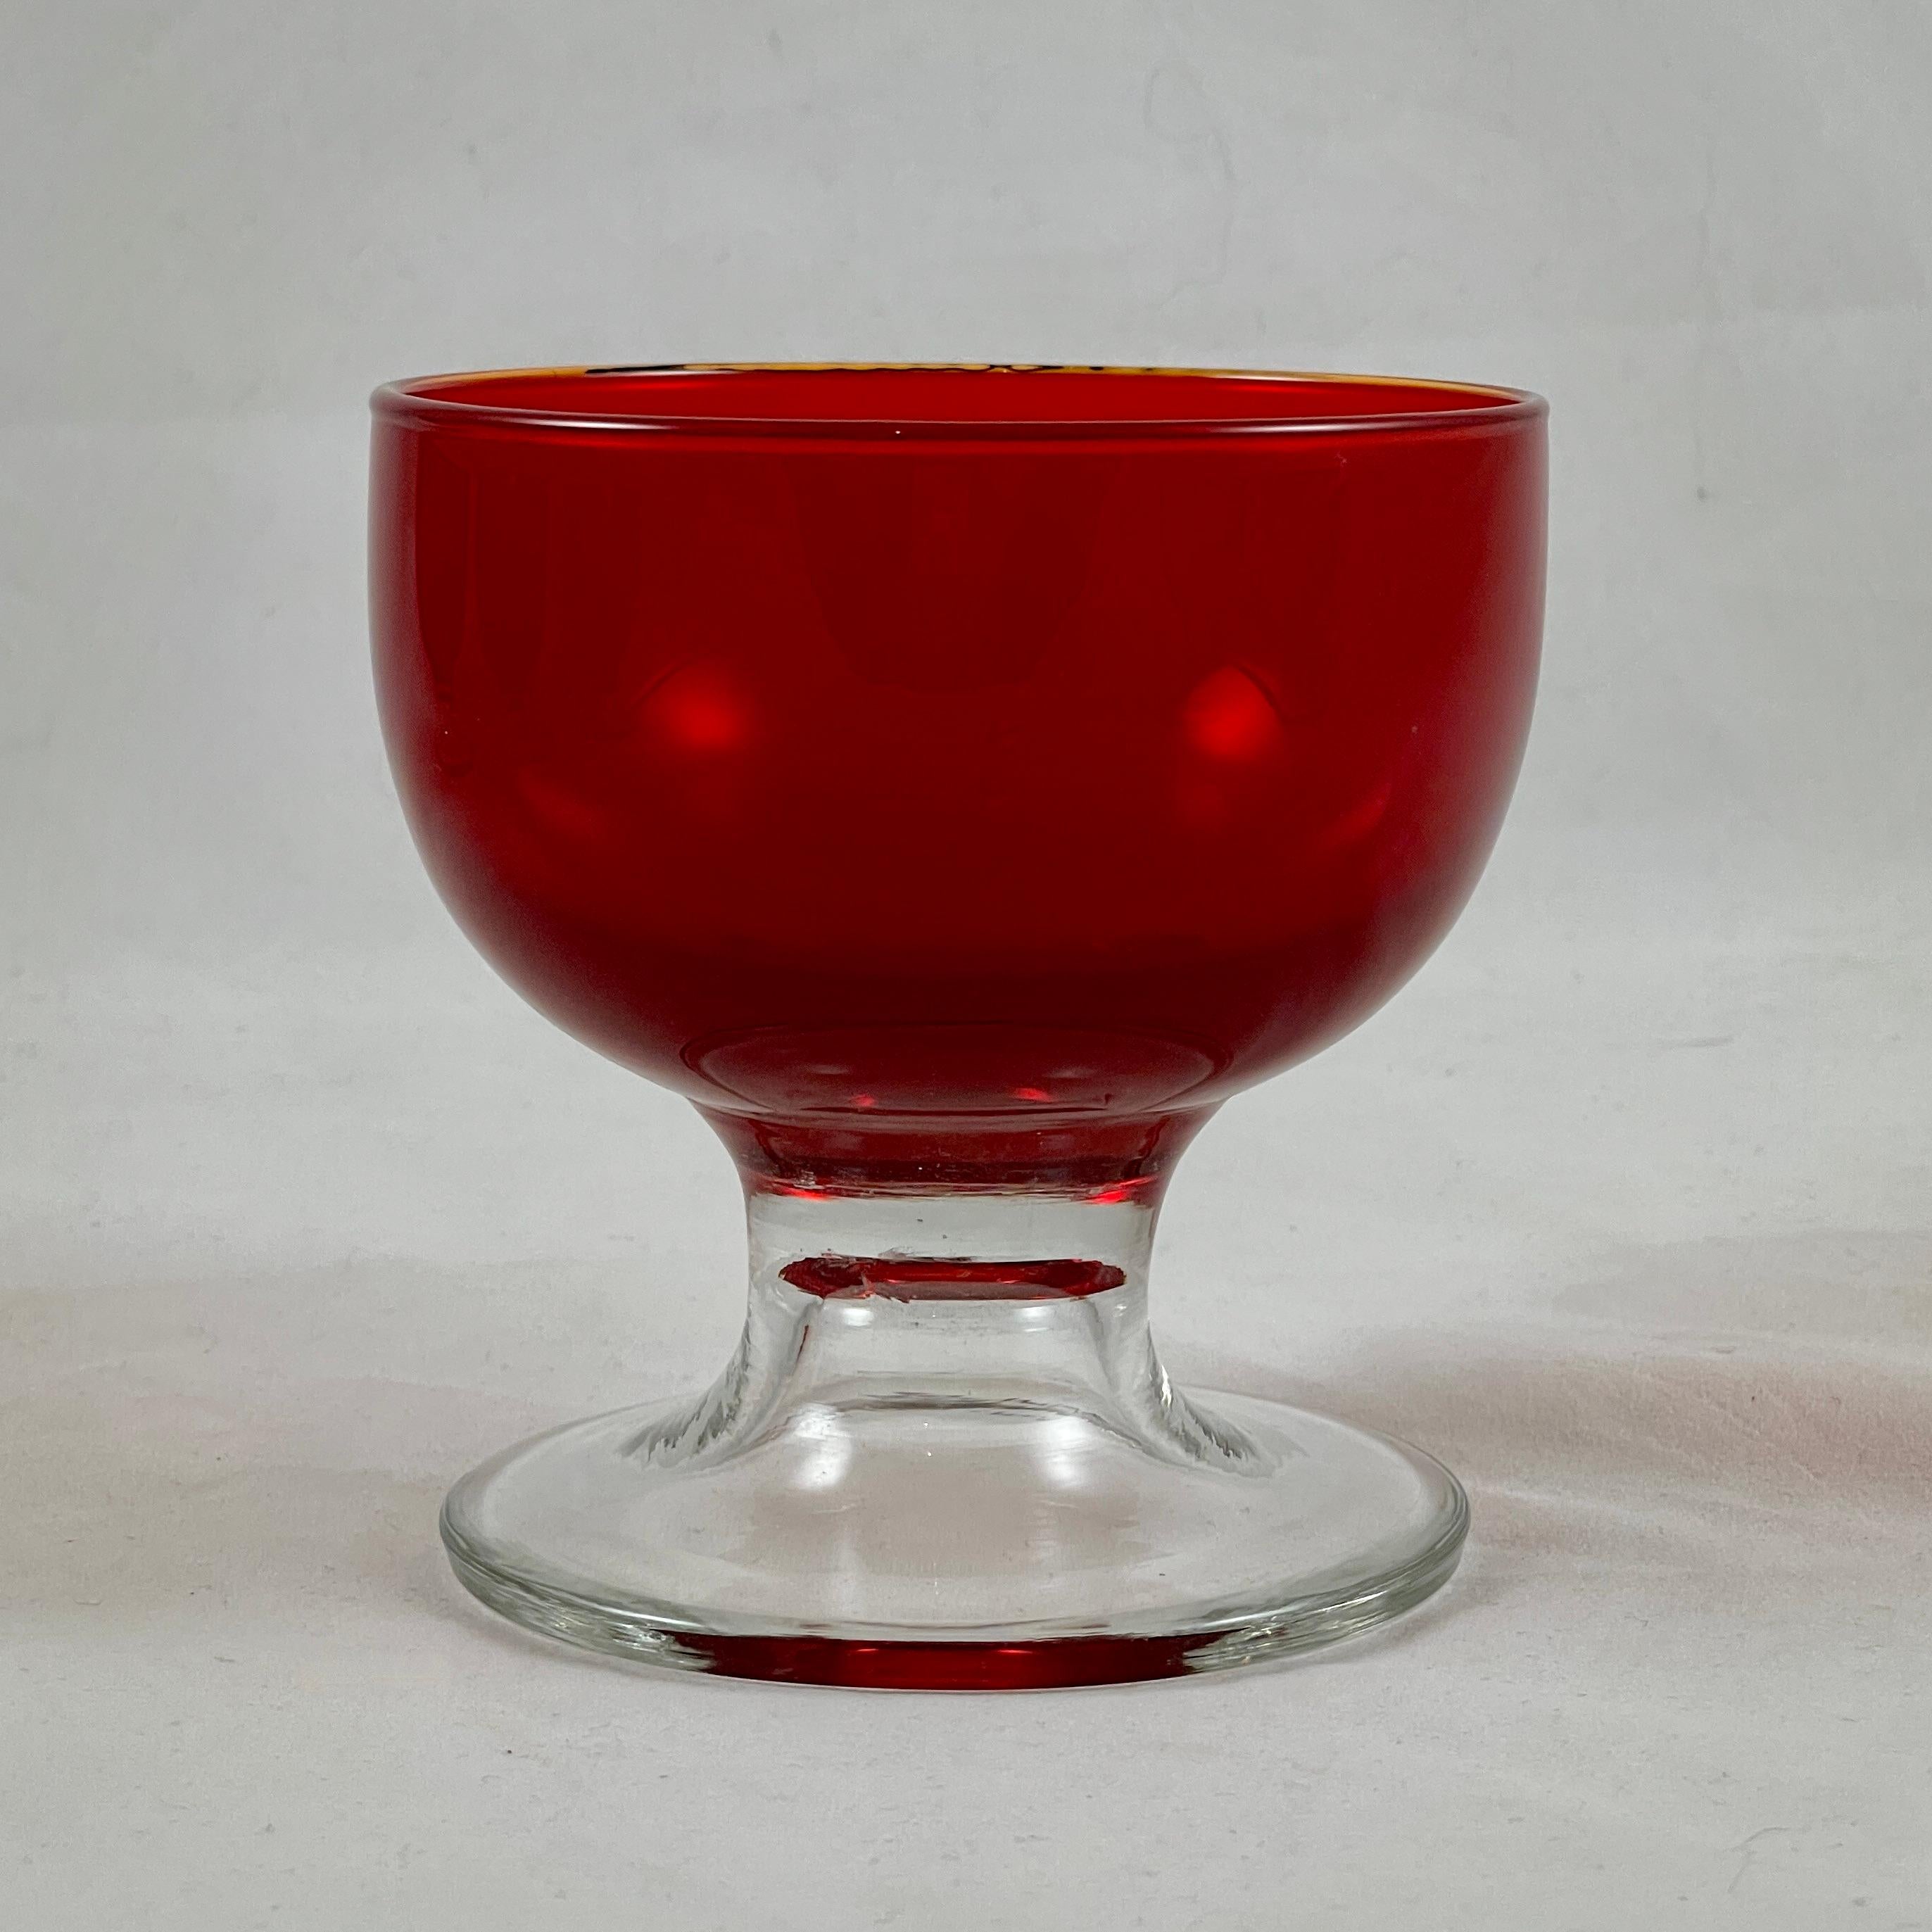 From the Venetian region of Northern Italy, a set of six Murano glass coupes or sherbets, circa 1950-1960.

Ruby Red bowls are fused to heavy colorless glass pedestal bases in a distinctive Italian mid-century design. Still showing the original